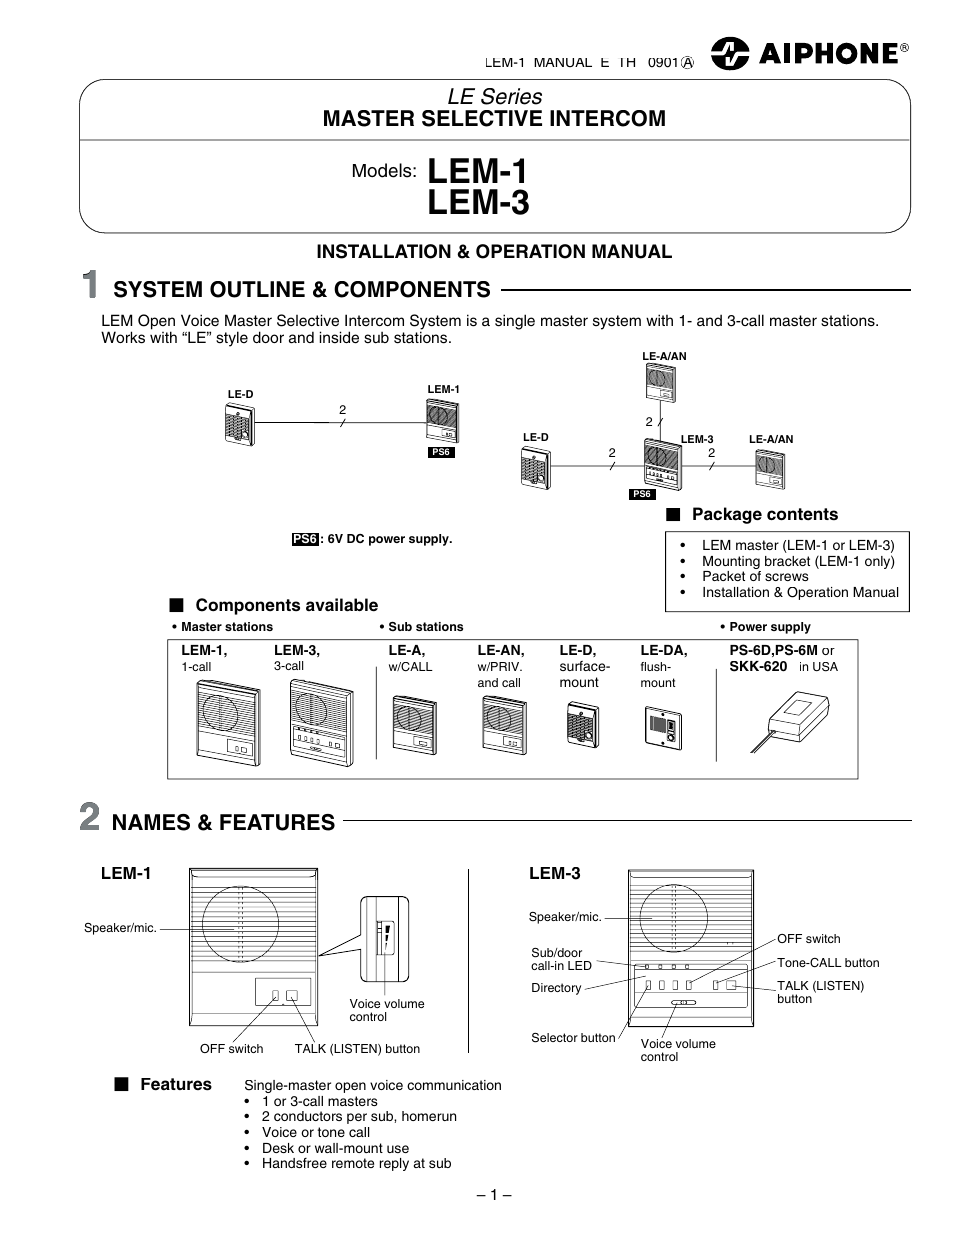 Aiphone LEM-3 User Manual | 4 pages | Also for: LEM-1